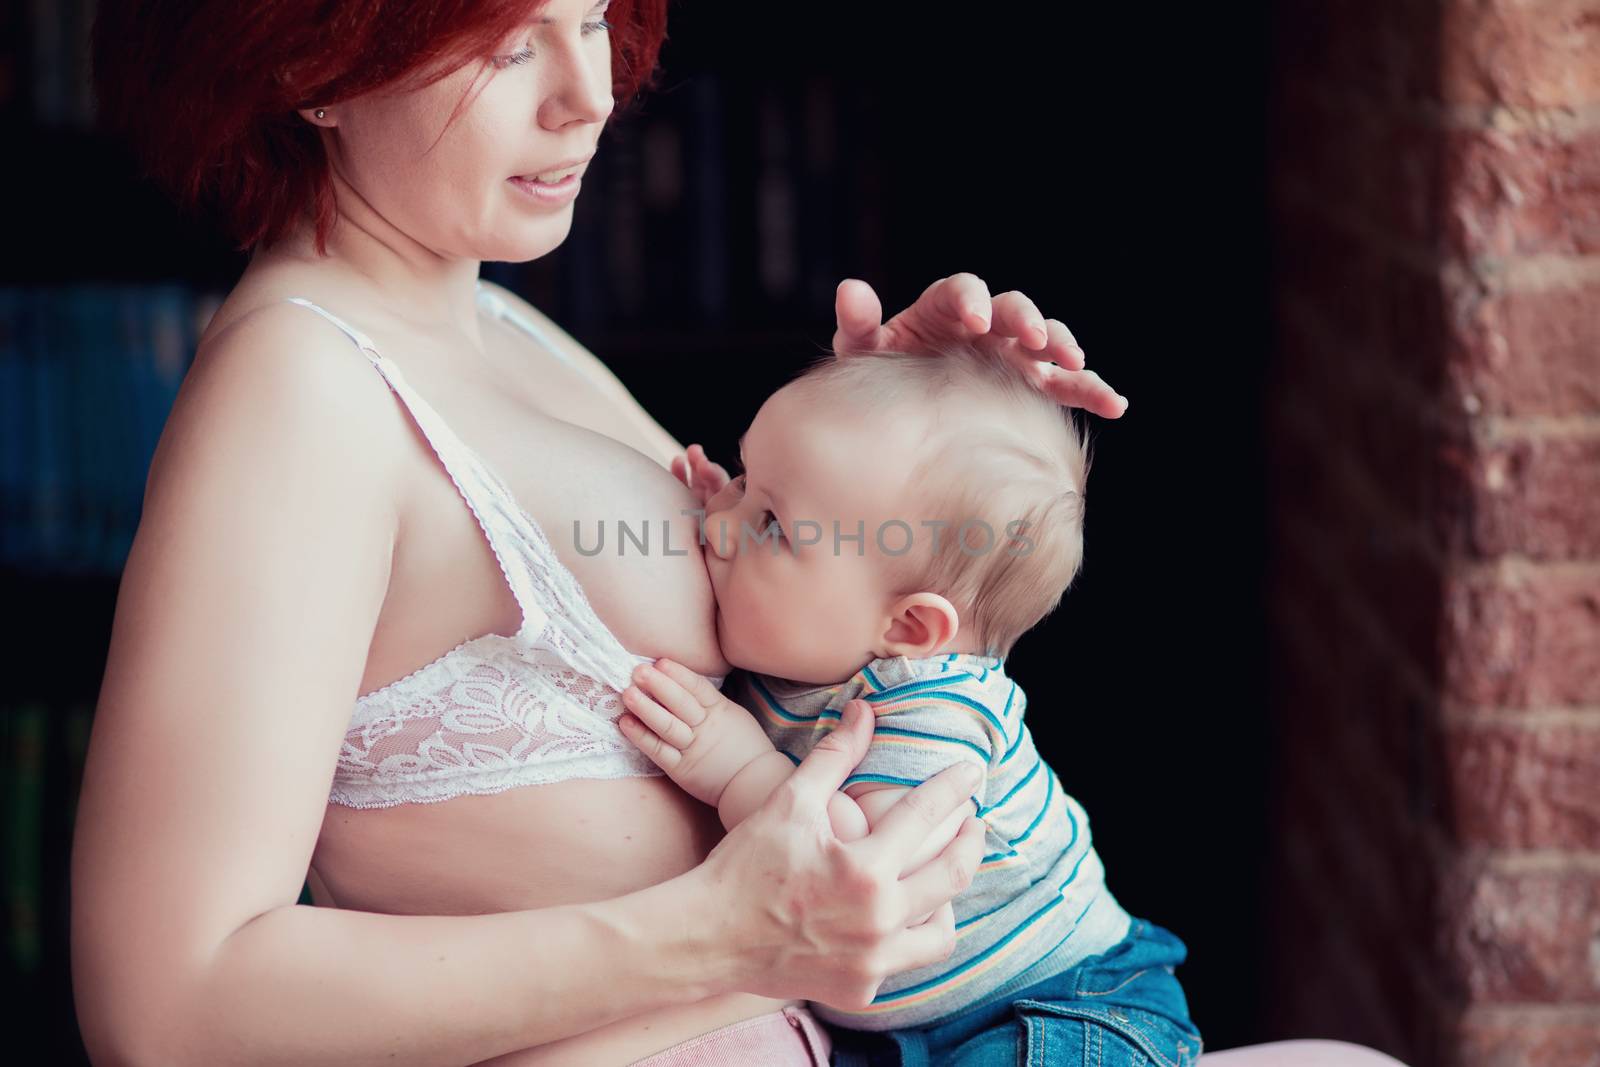 A young mother is breastfeeding her little child and looking at him tenderly